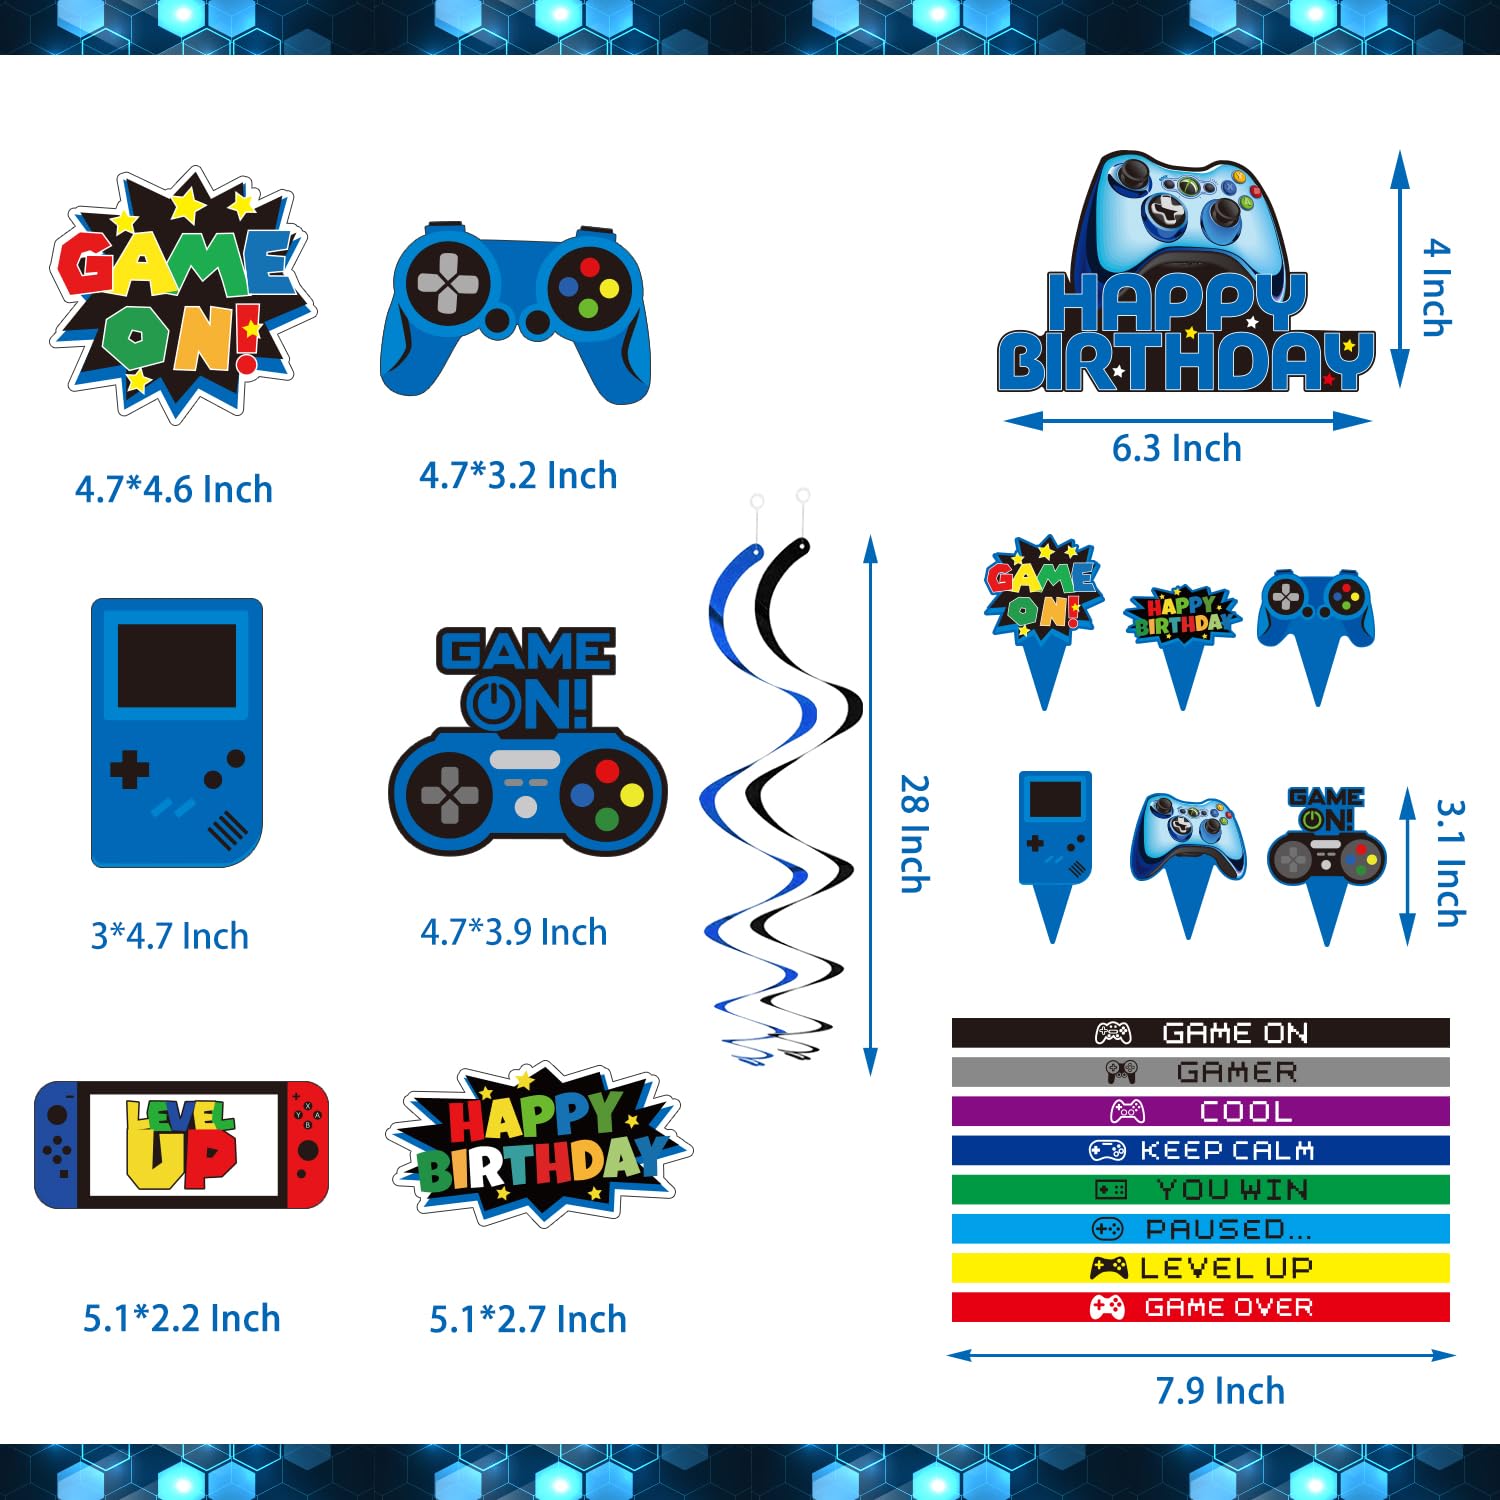 Mpanwen Blue Gamer Birthday Party Decoration - 218Pcs Video Game Gaming Party Supplies For Boys Birthday Party - Backdrop, Table Cover, Cupcakes Wrappers, Stickers, Bracelets Serves 10 Guests